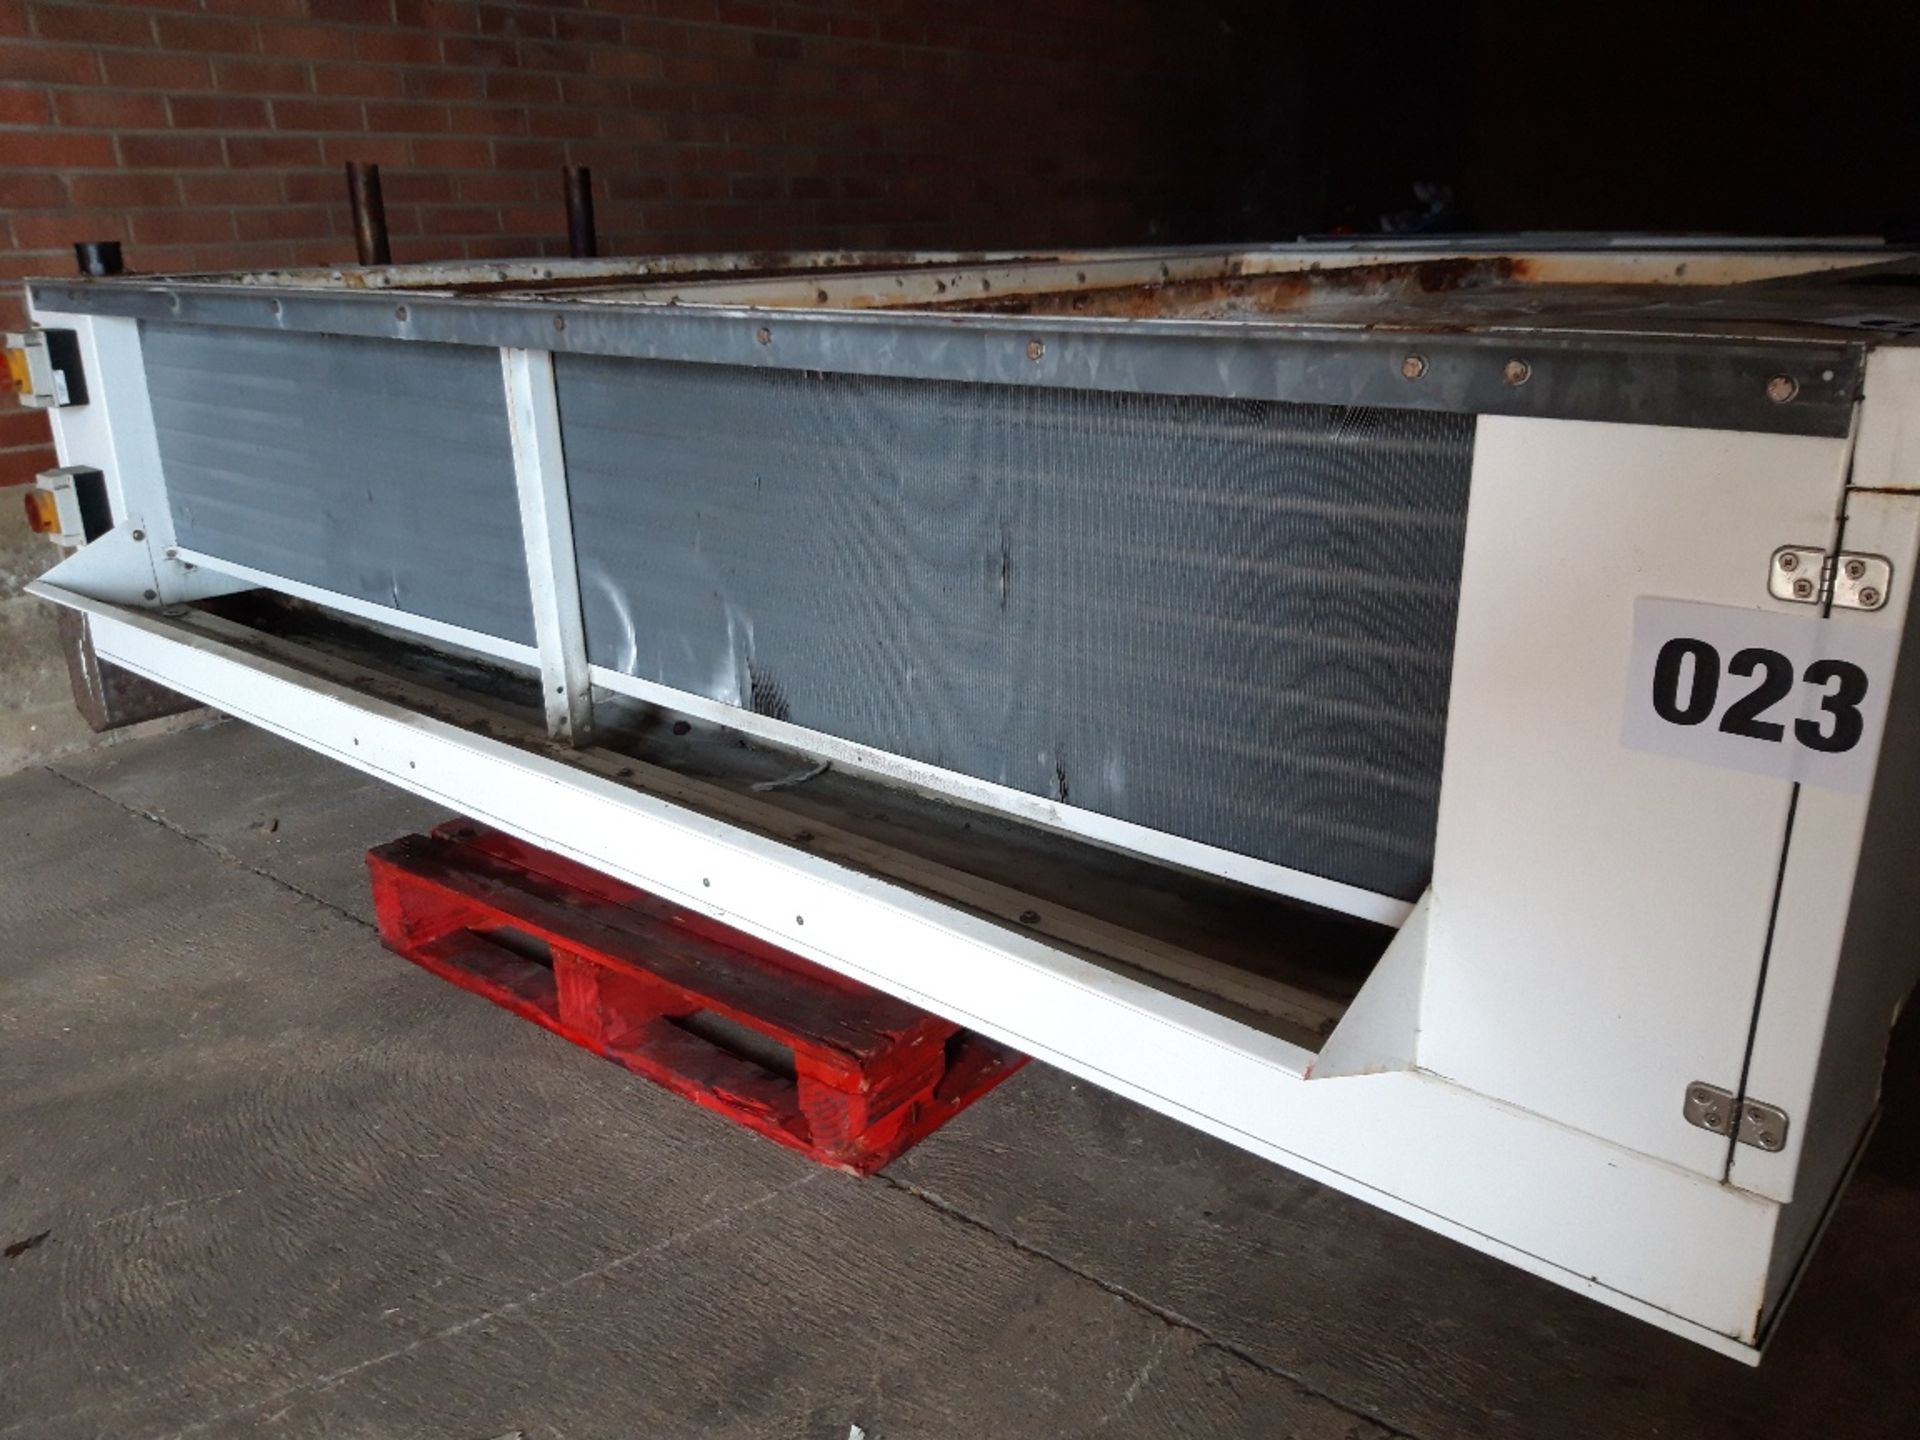 Evaporator Model DDL 6 - 60 by Heating + Cooling Coils. Lift out £80was working in factory .